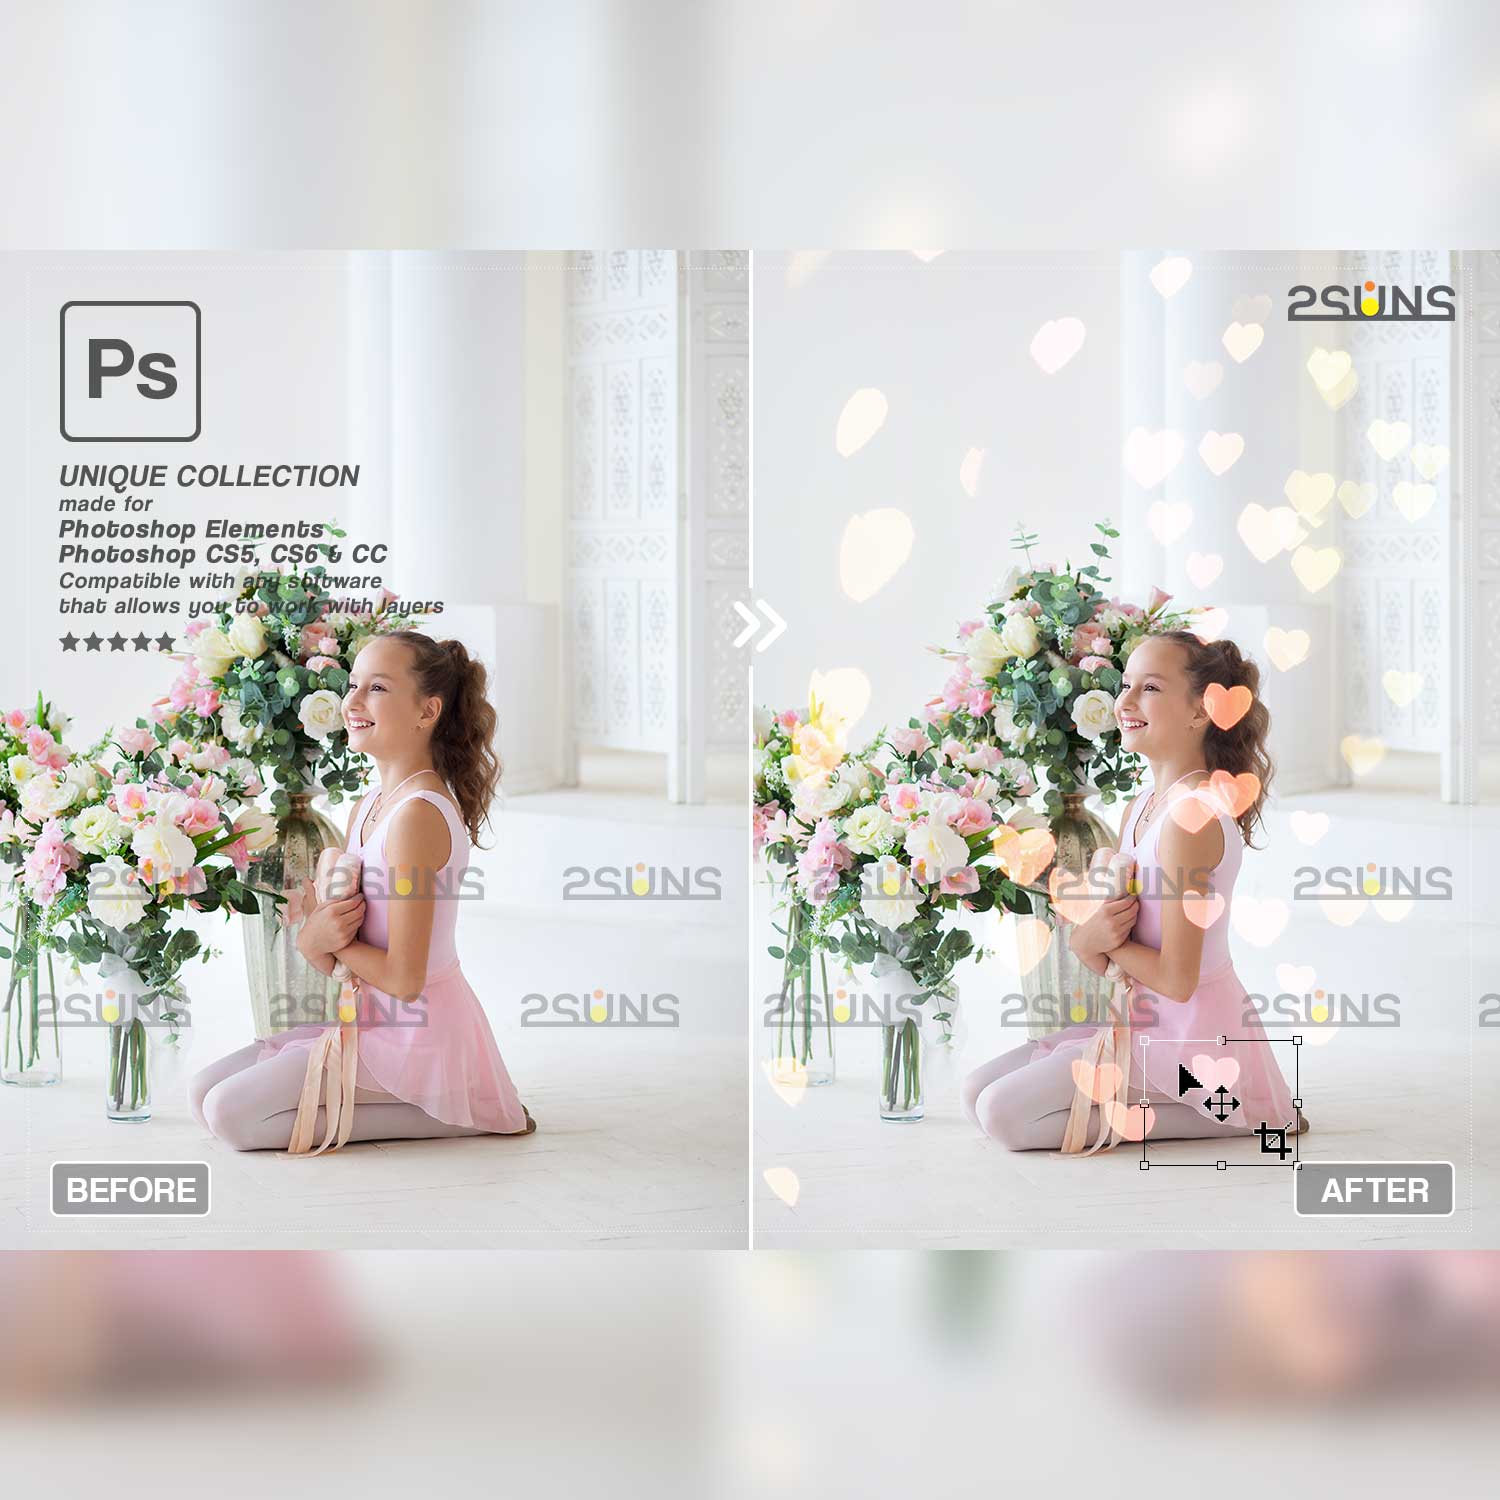 Beautiful Bokeh Light Photoshop Overlays Before And After.